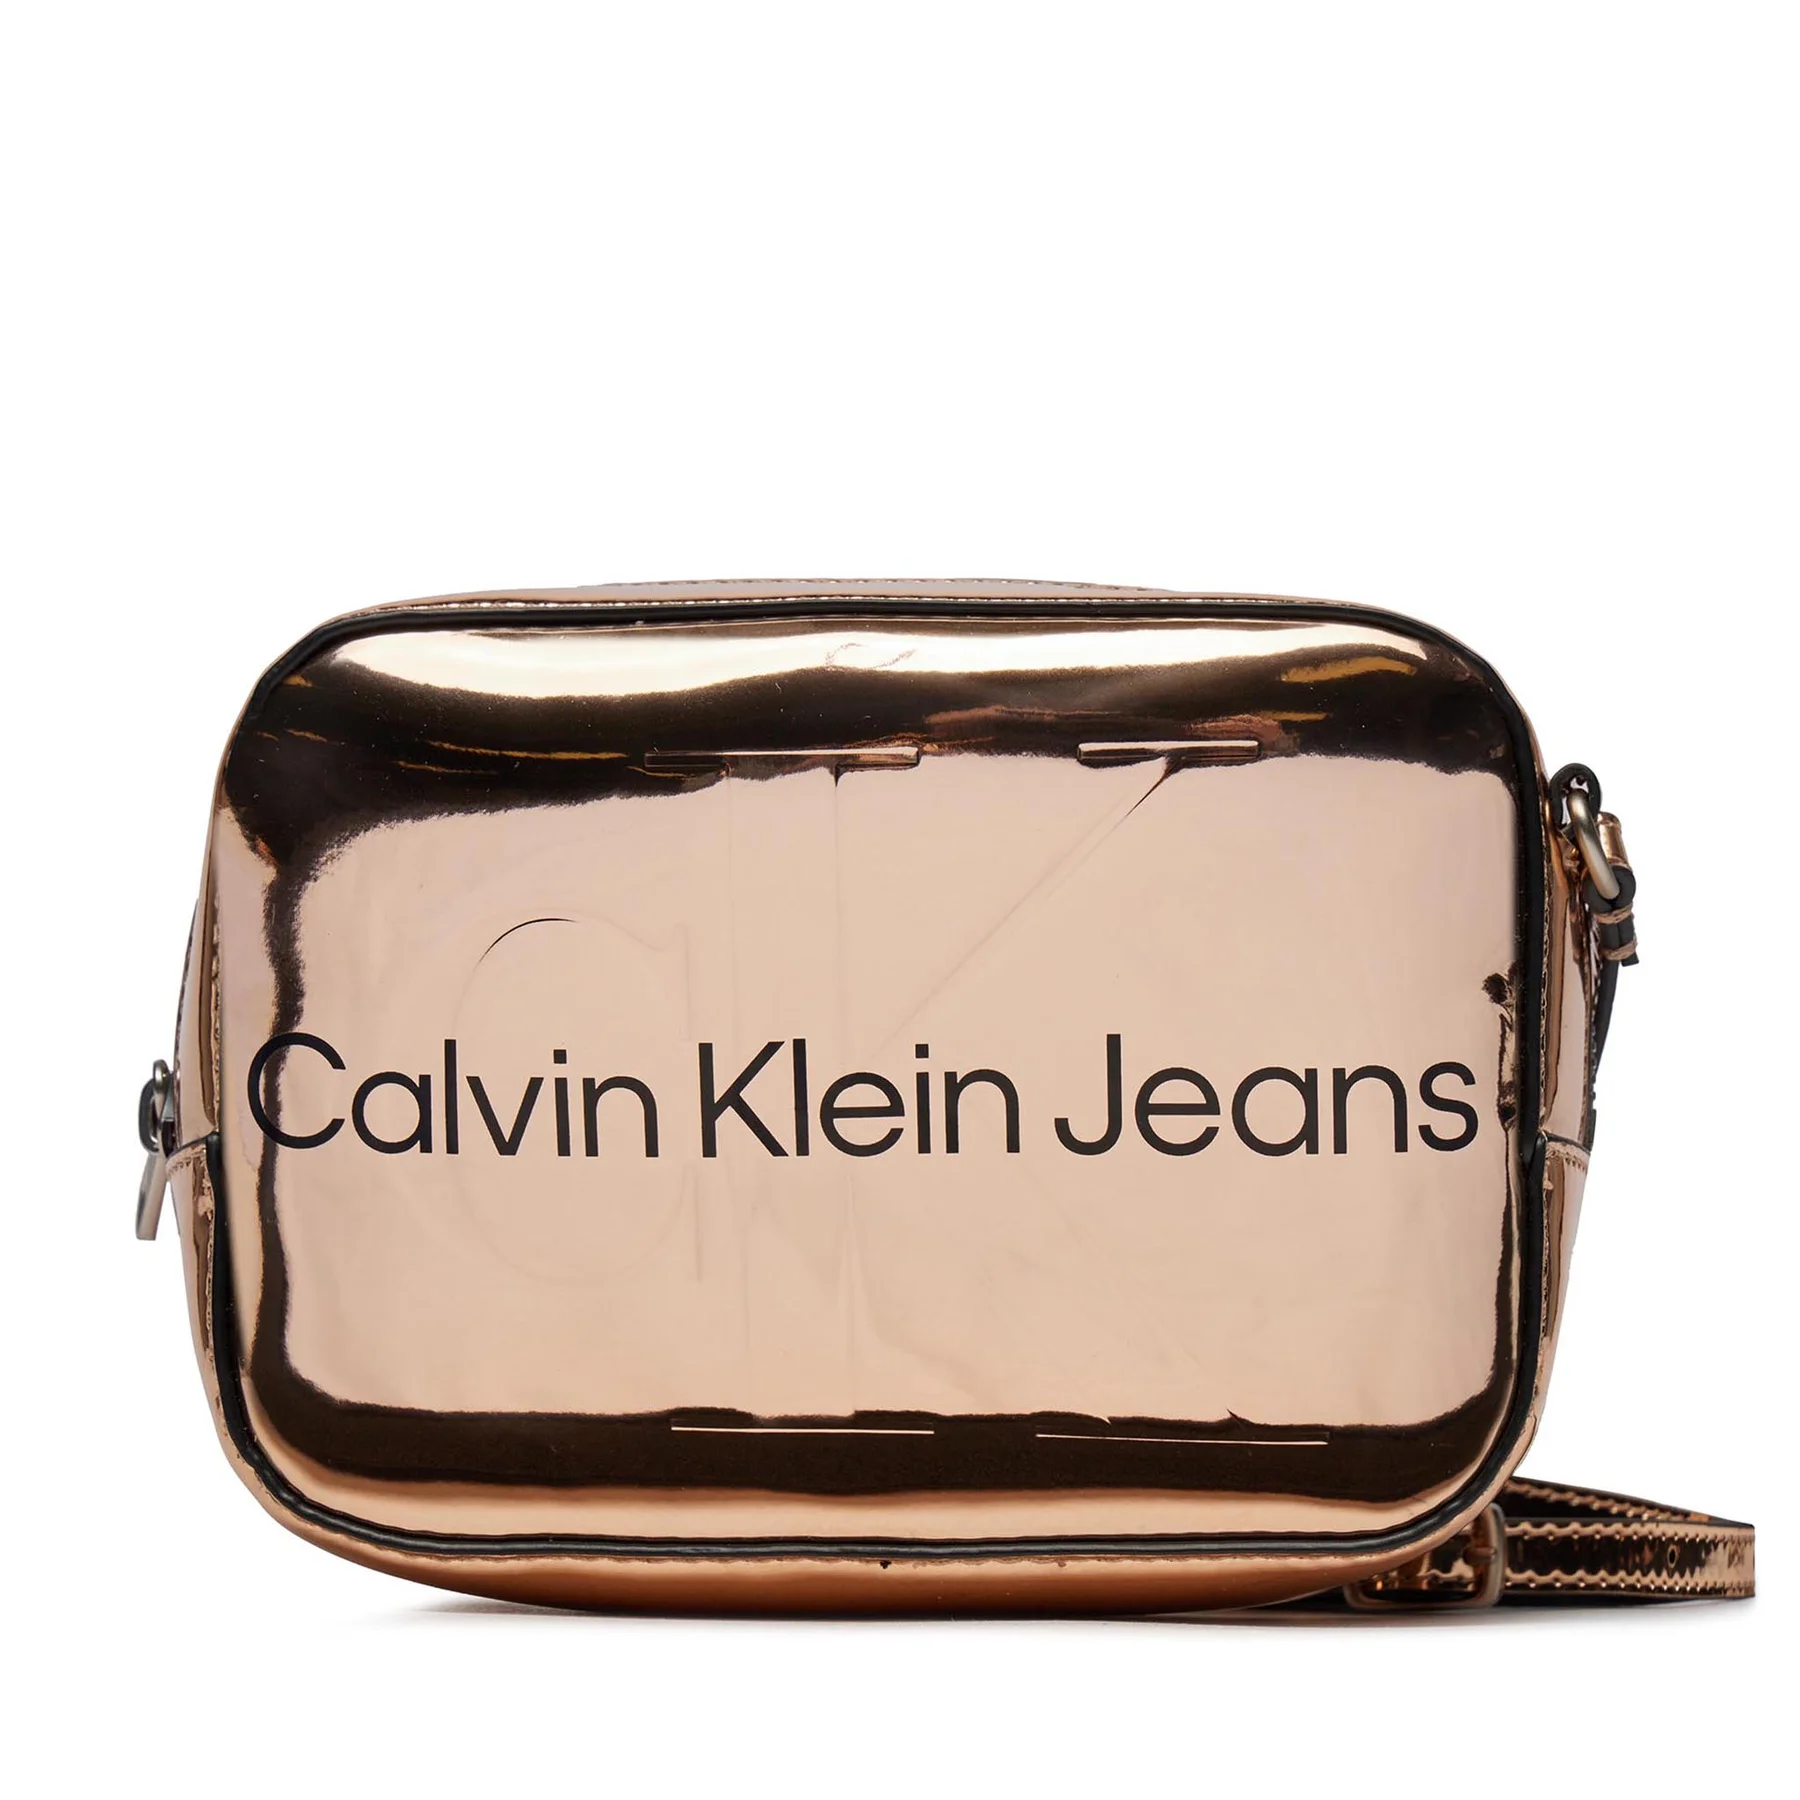 borsetta-calvin-klein-jeans-sculpted-camera-bag18-mono-f-k60k611859-frosted-almond-tcy-8720109166446